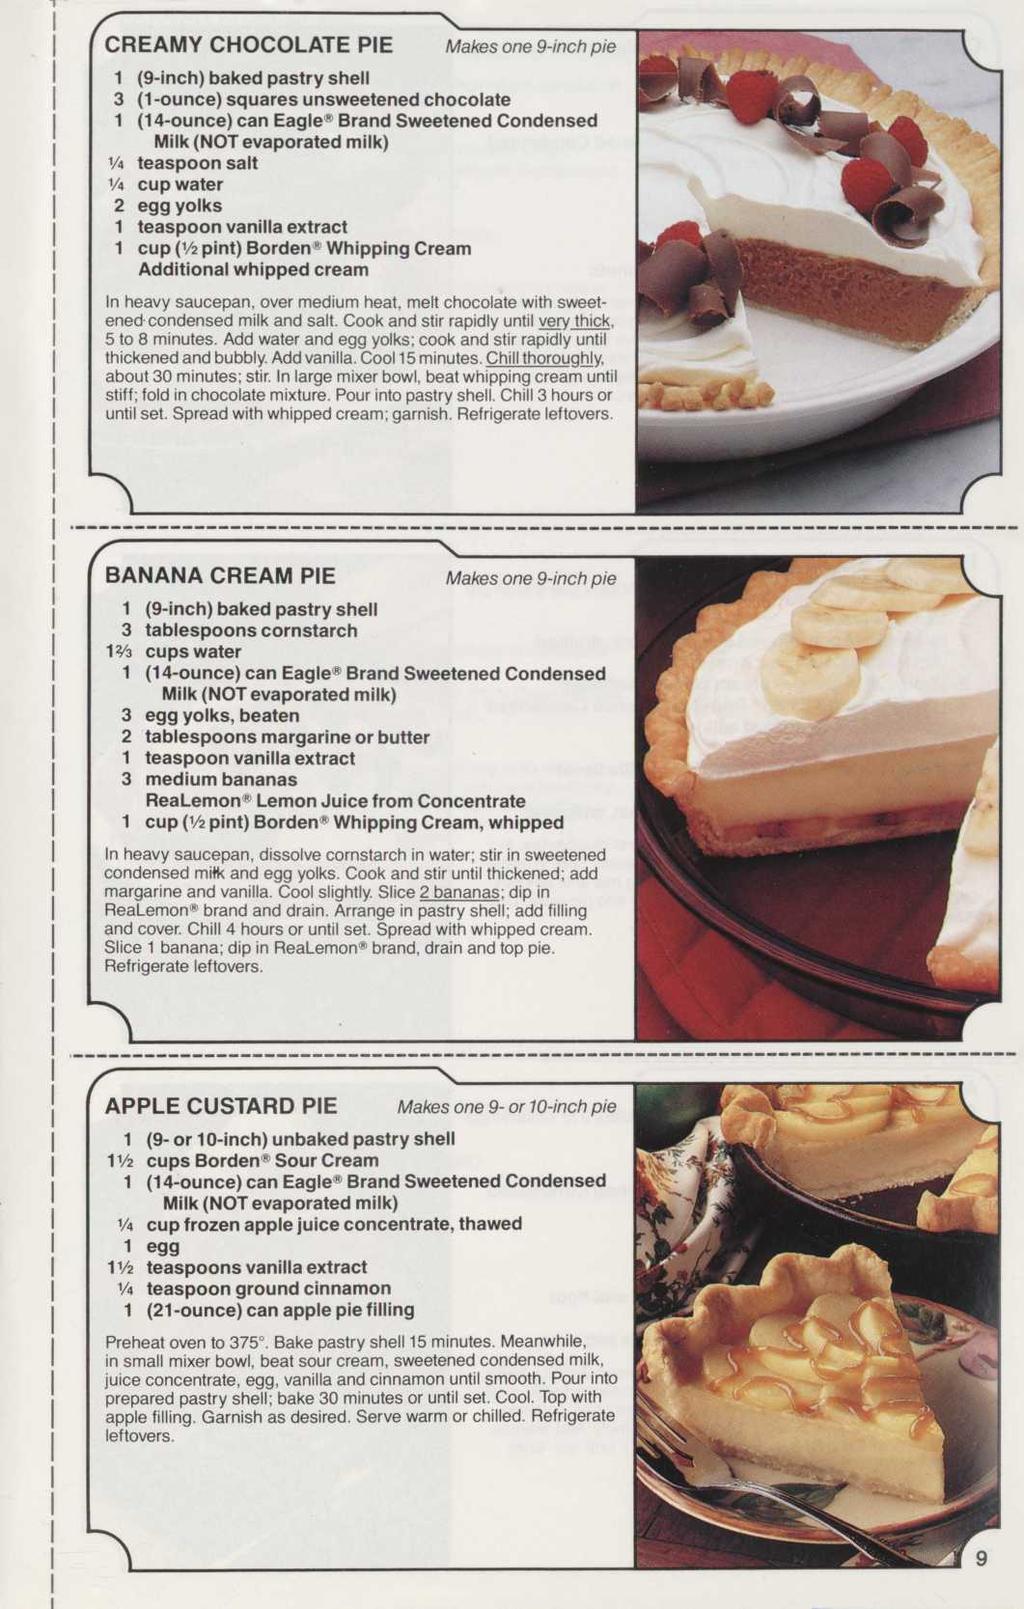 / CREAMY CHOCOLATE PIE Makes one 9-inch pie 3 /4 /4 2 (9-inch) baked pastry shell (-ounce) squares unsweetened chocolate (4-ounce) can Eagle Brand Sweetened Condensed teaspoon salt cup water egg